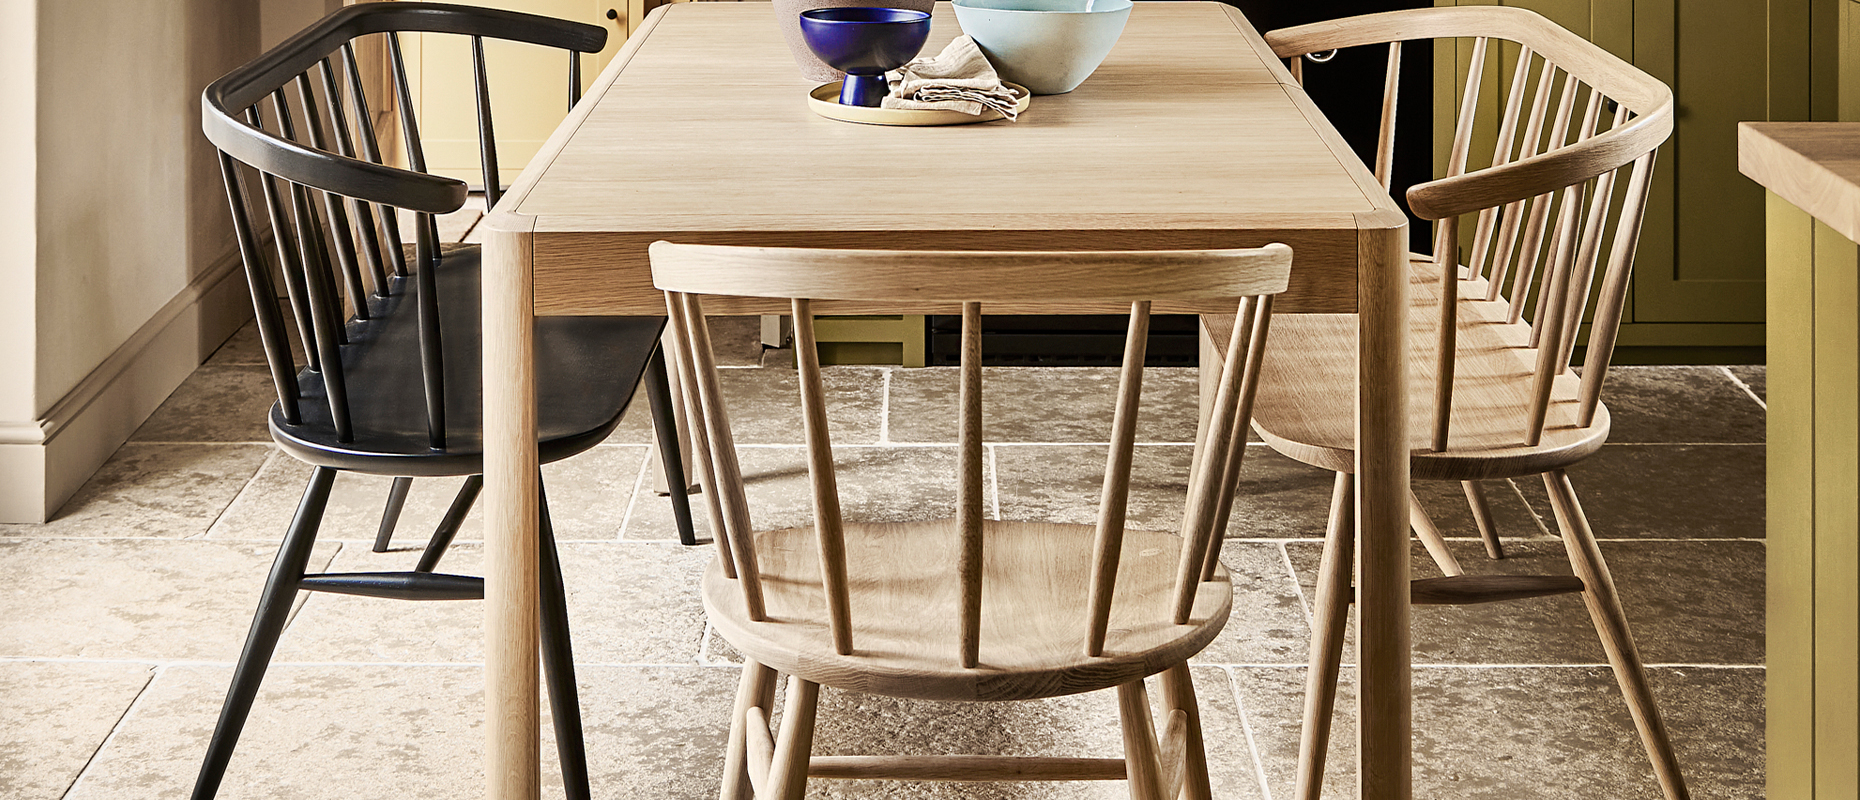 Mia and Heritage Dining collection by ercol at Forrest Furnishing